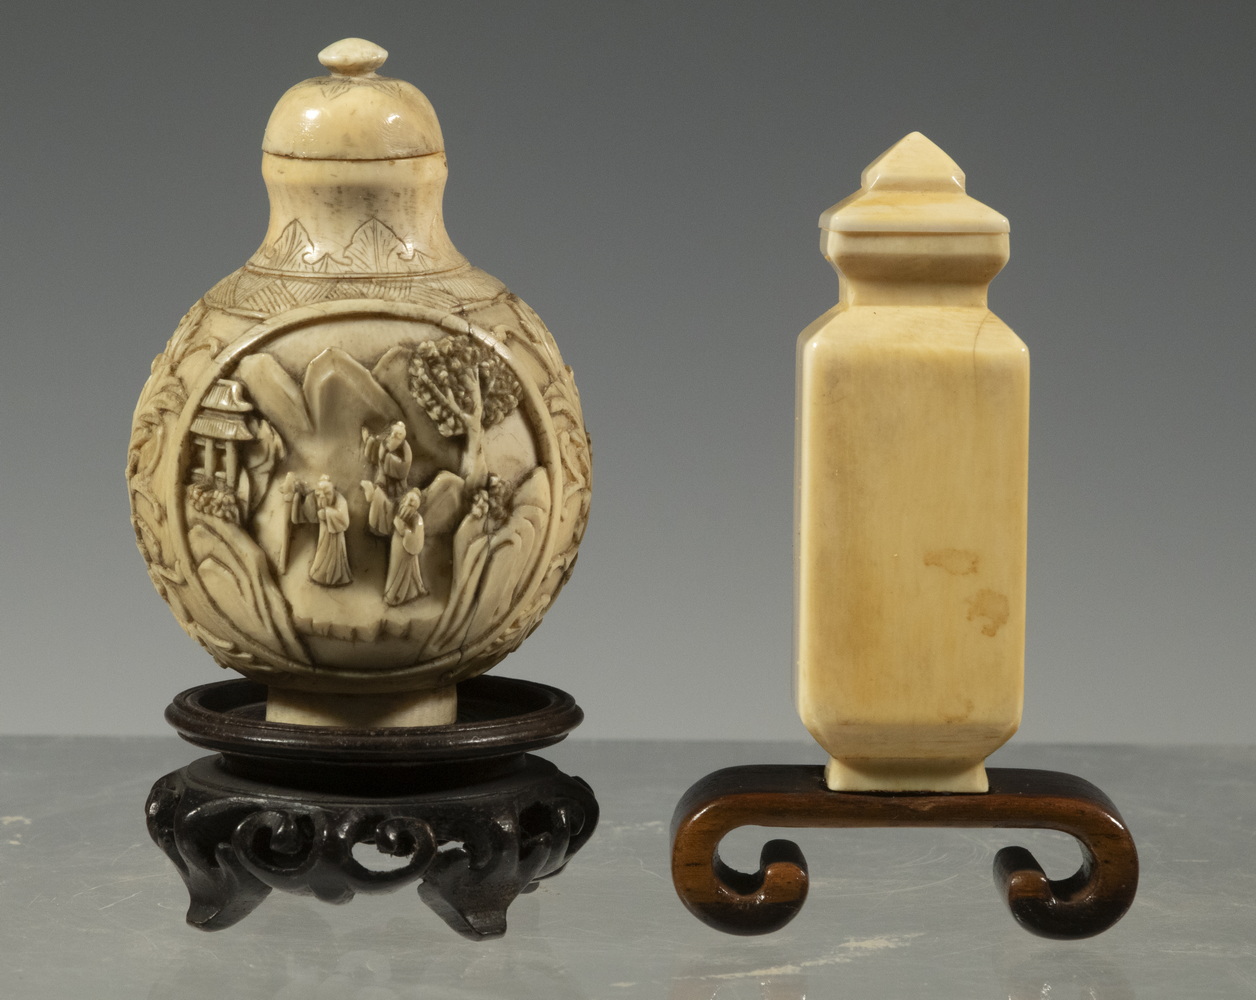  2 19TH C CHINESE IVORY SNUFF 302acc